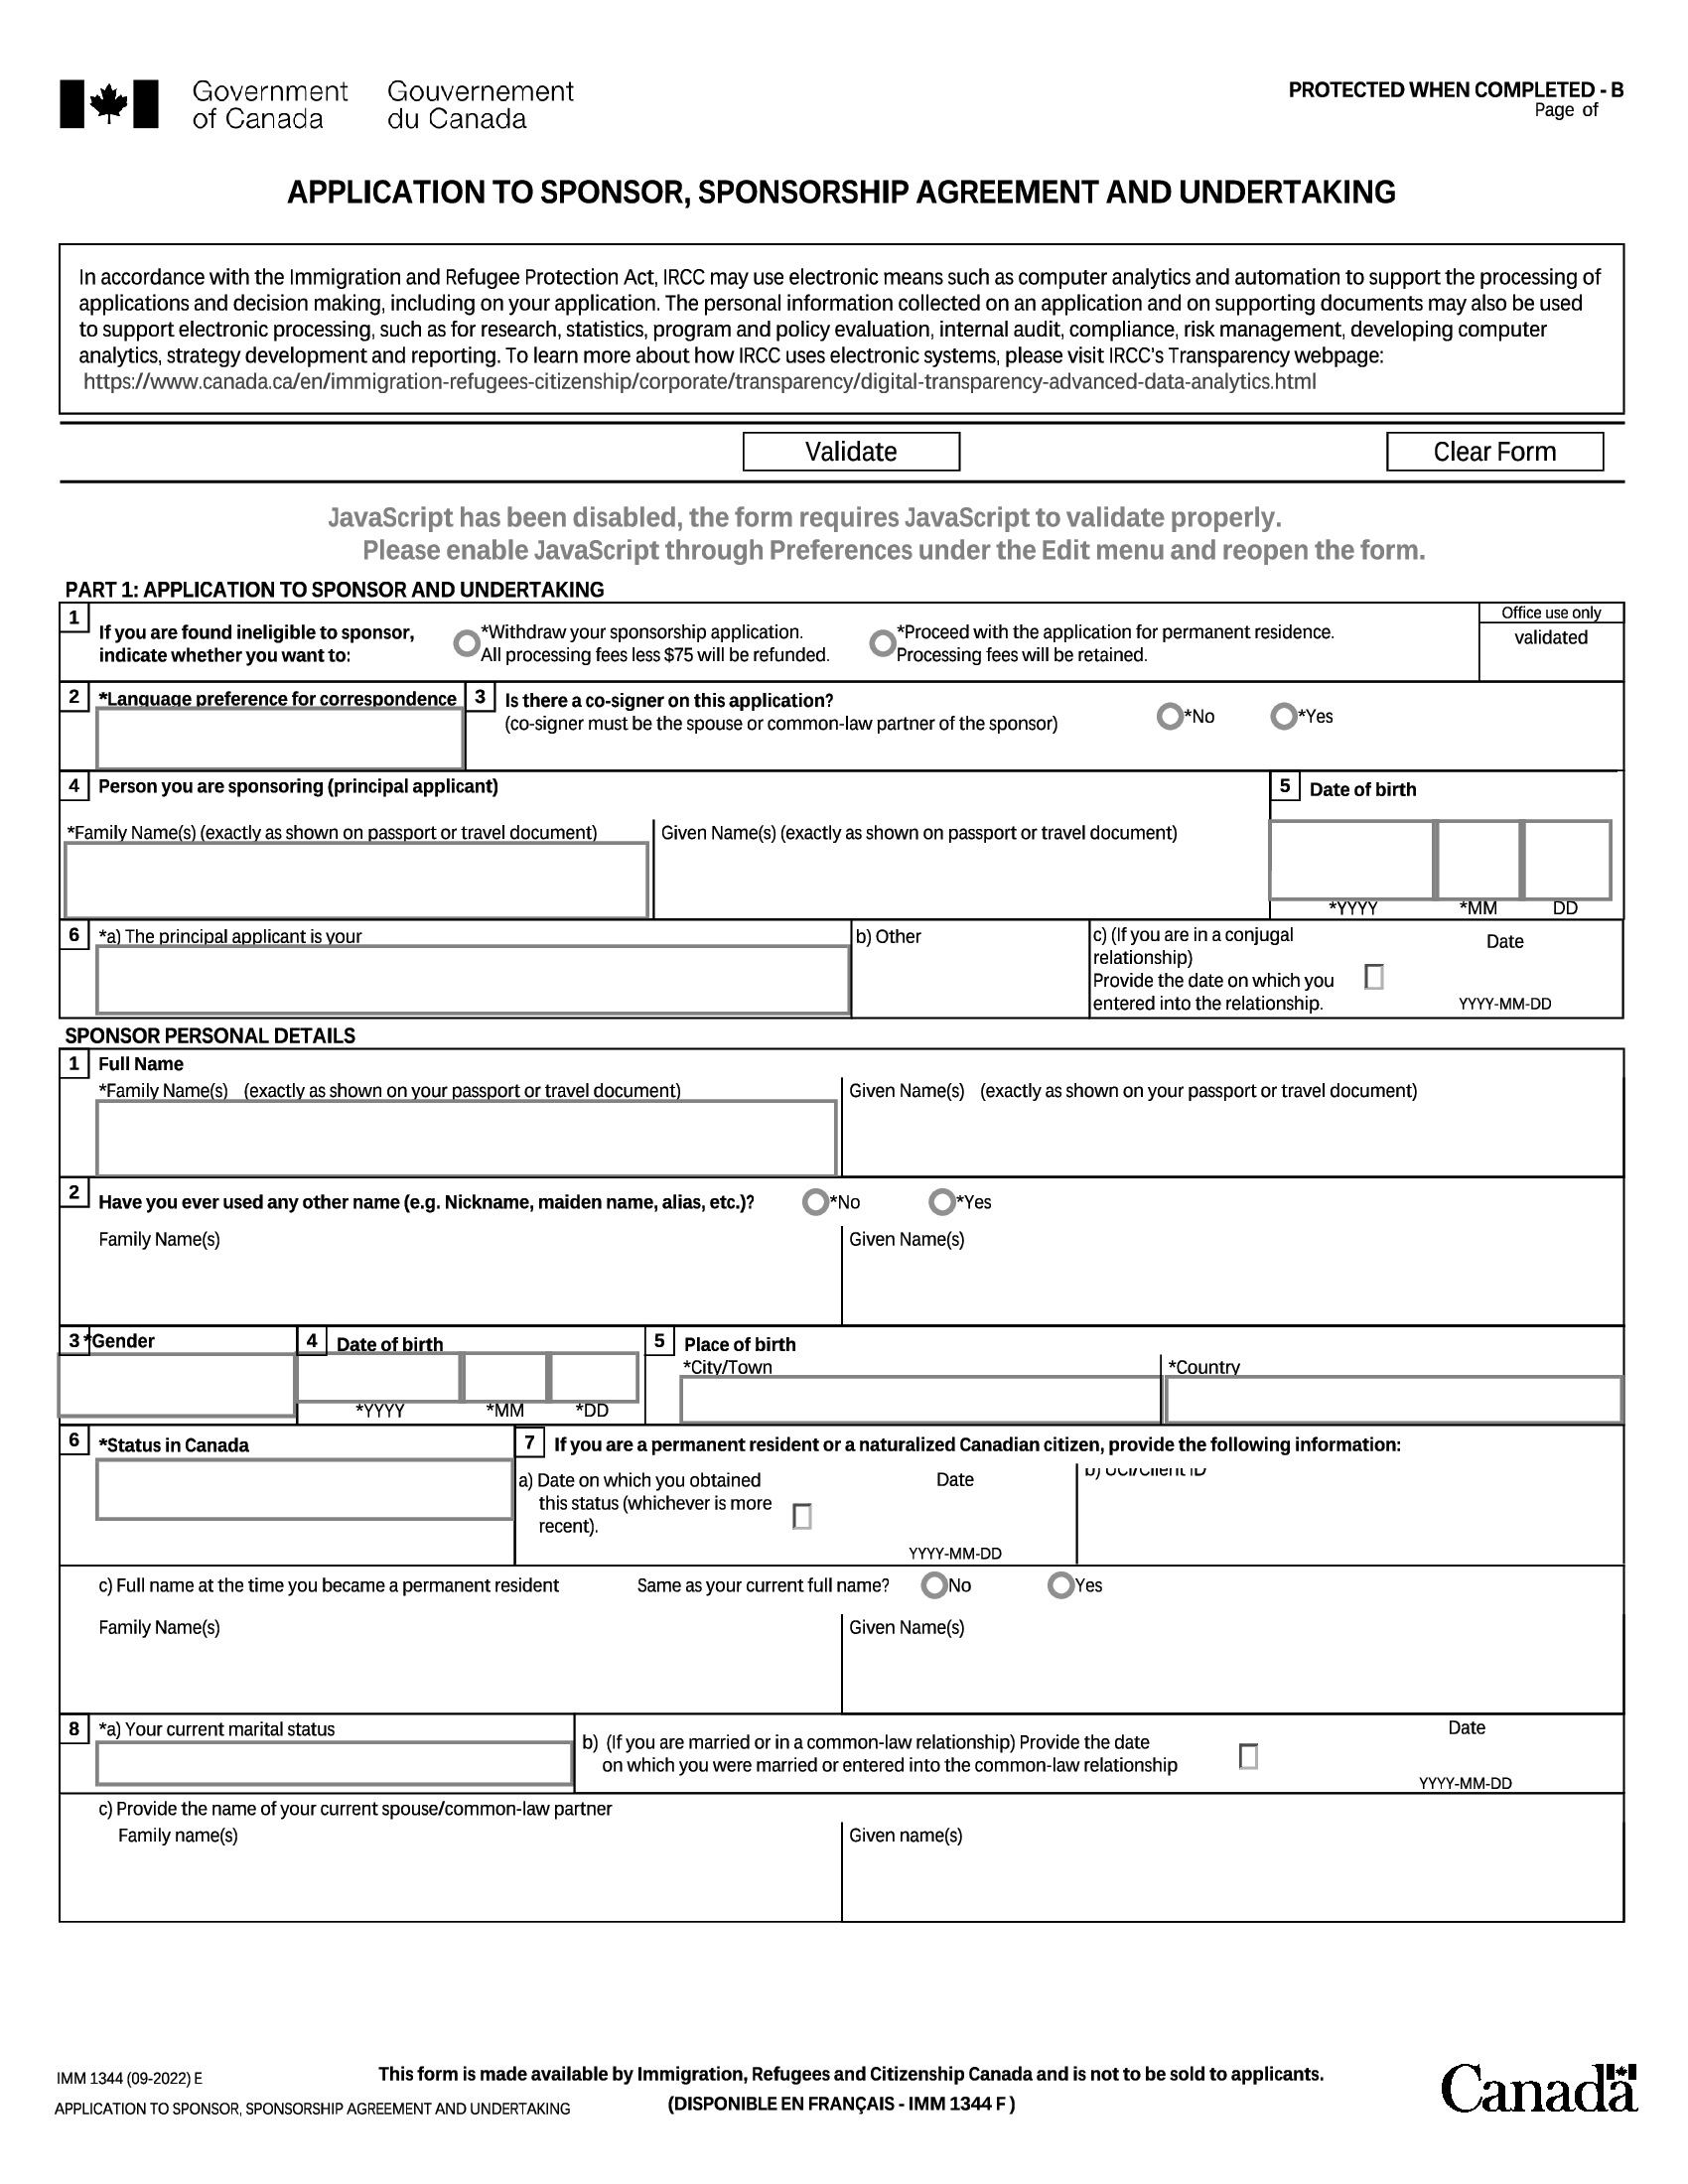 form-imm-1344-application-to-sponsor-sponsorship-agreement-and